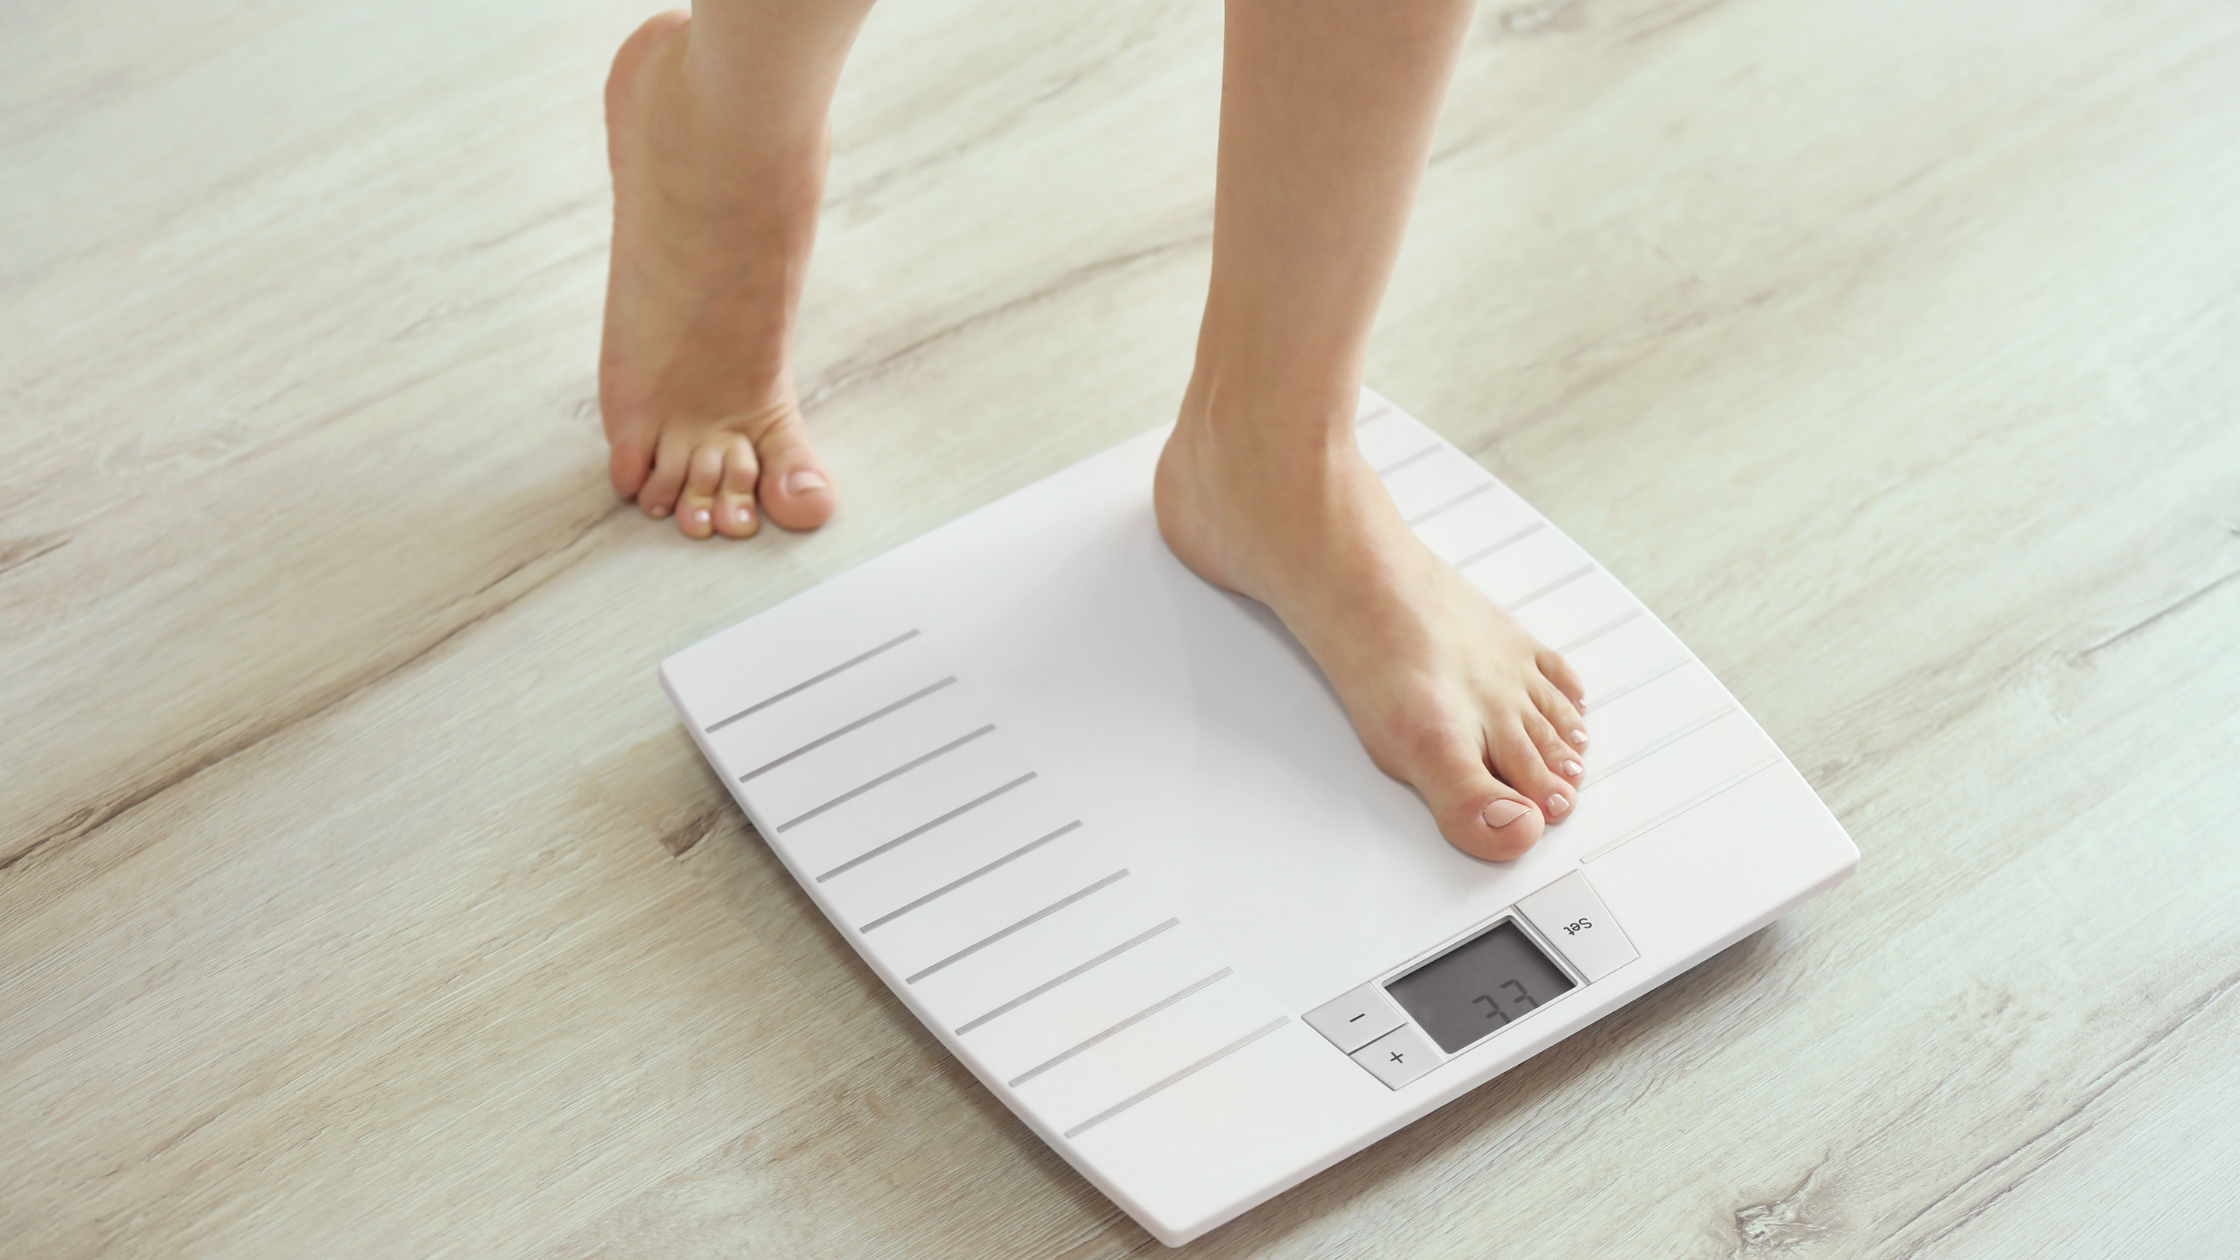 Weight Gain during Menopause: Is It Normal?